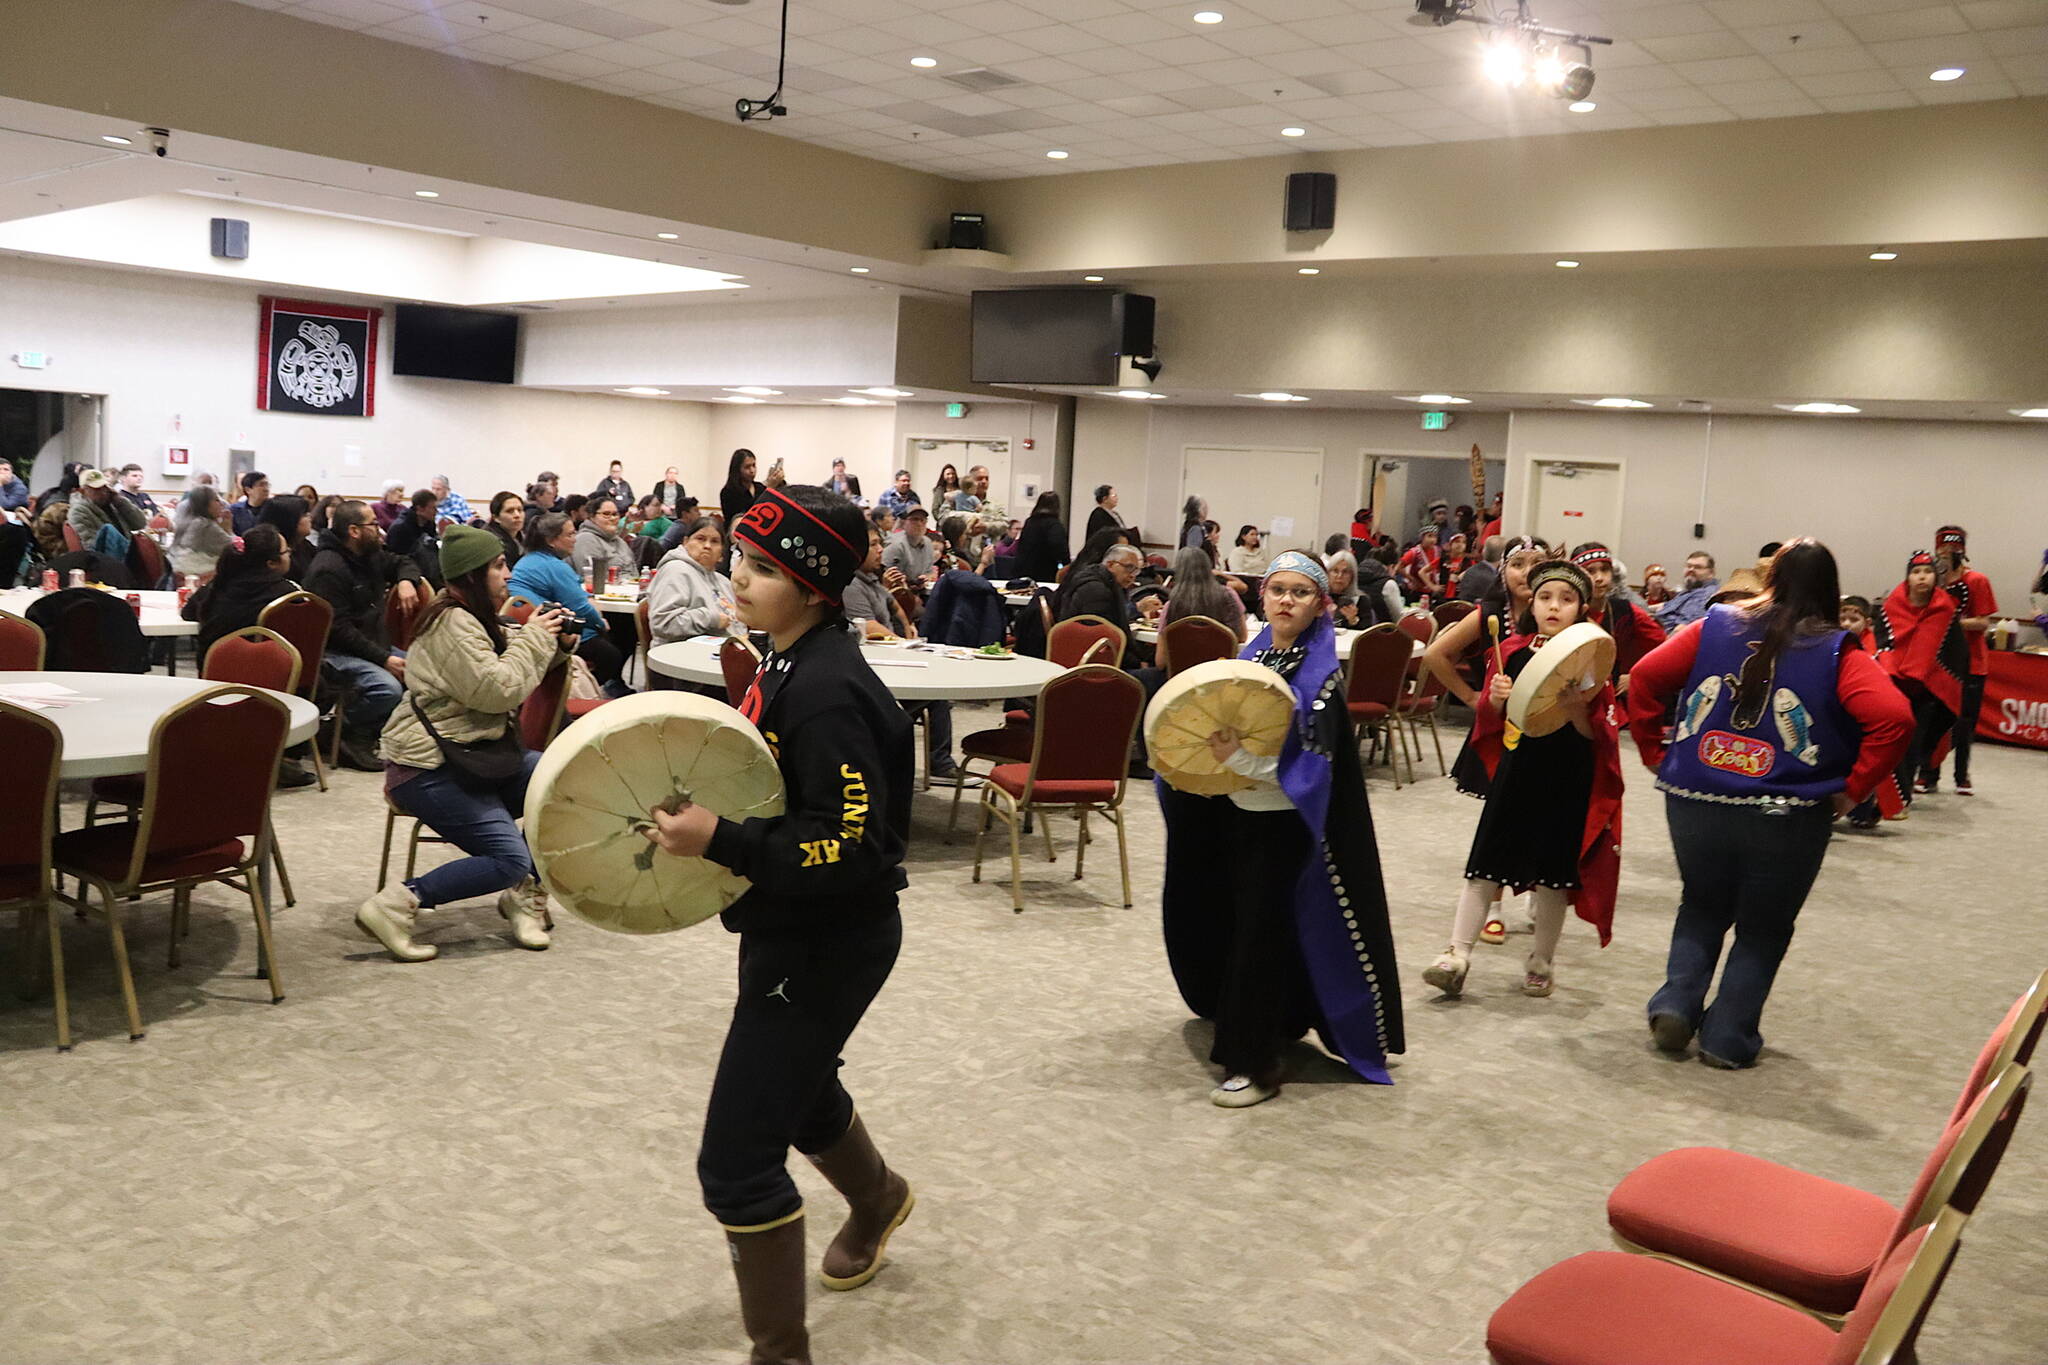 Students with the Tlingit Culture, Language and Literacy Program perform a traditional dance during a “community conversation” between local Alaska Native residents and municipal leaders Thursday night at Elizabeth Peratrovich Hall to discuss the Juneau School District’s budget crisis. (Mark Sabbatini / Juneau Empire)